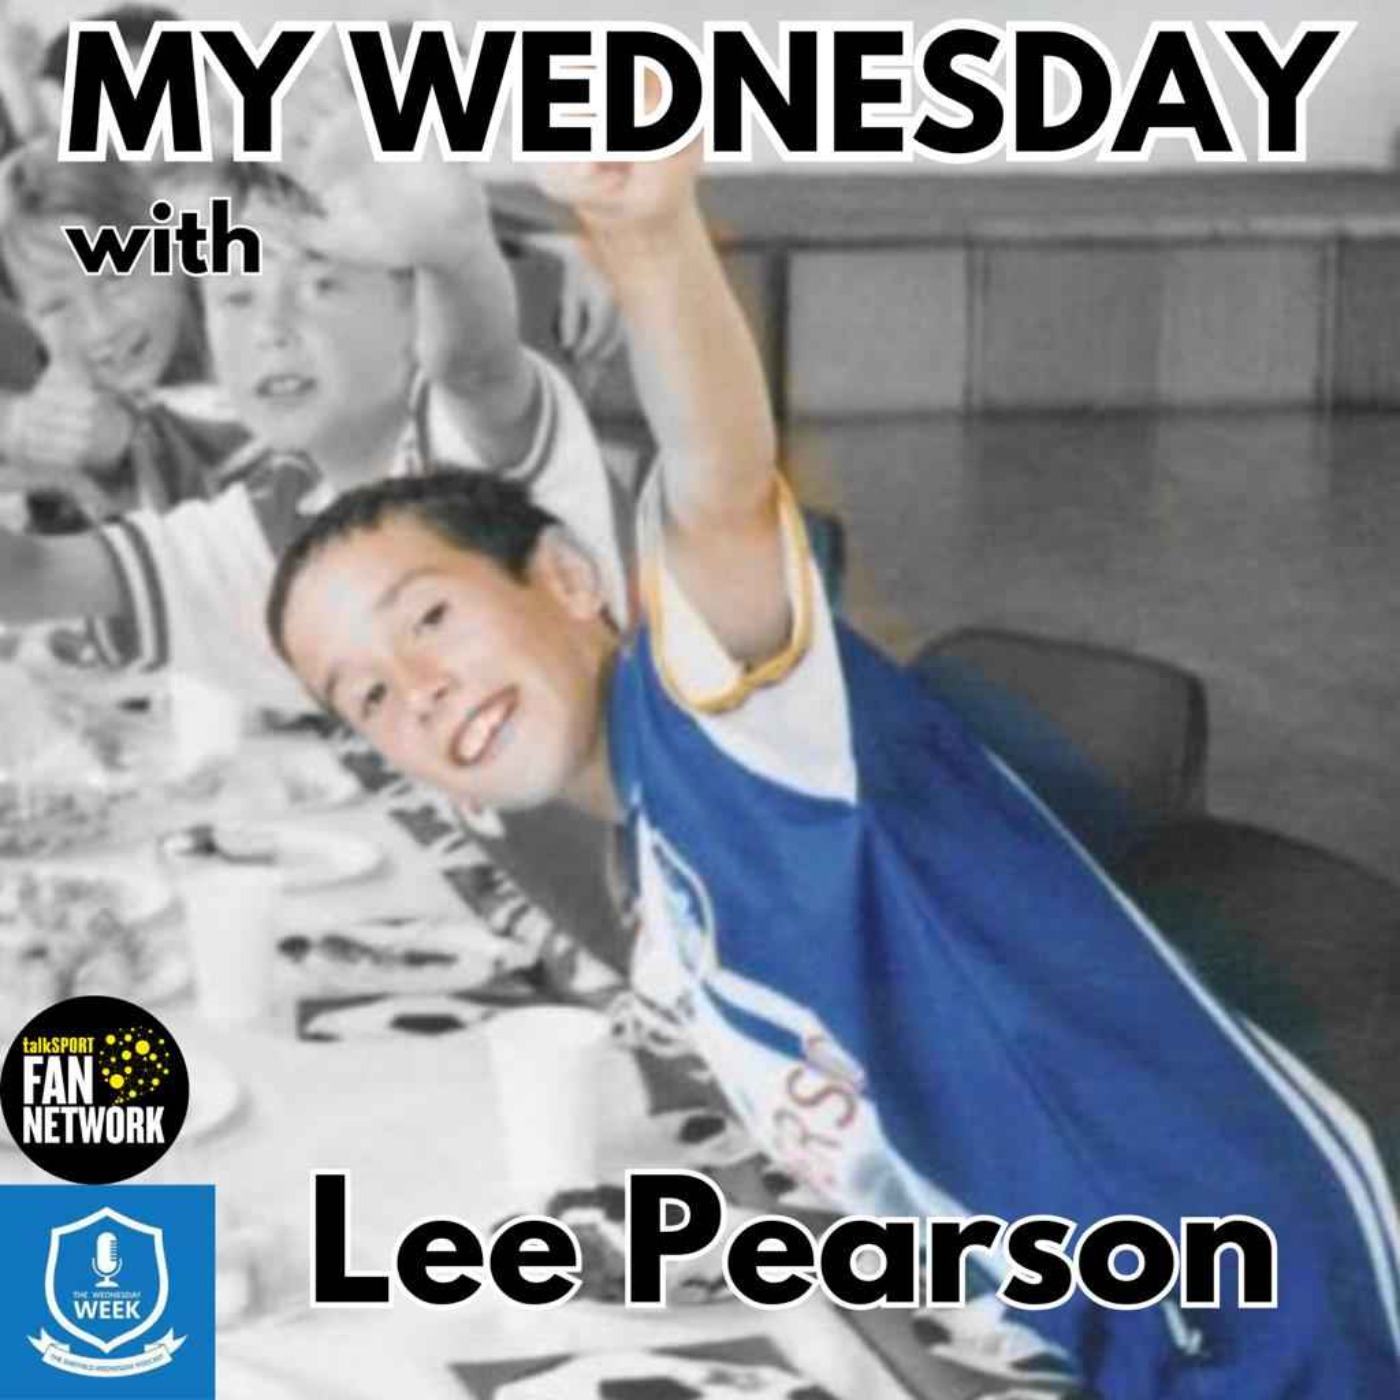 My Wednesday - Lee Pearson